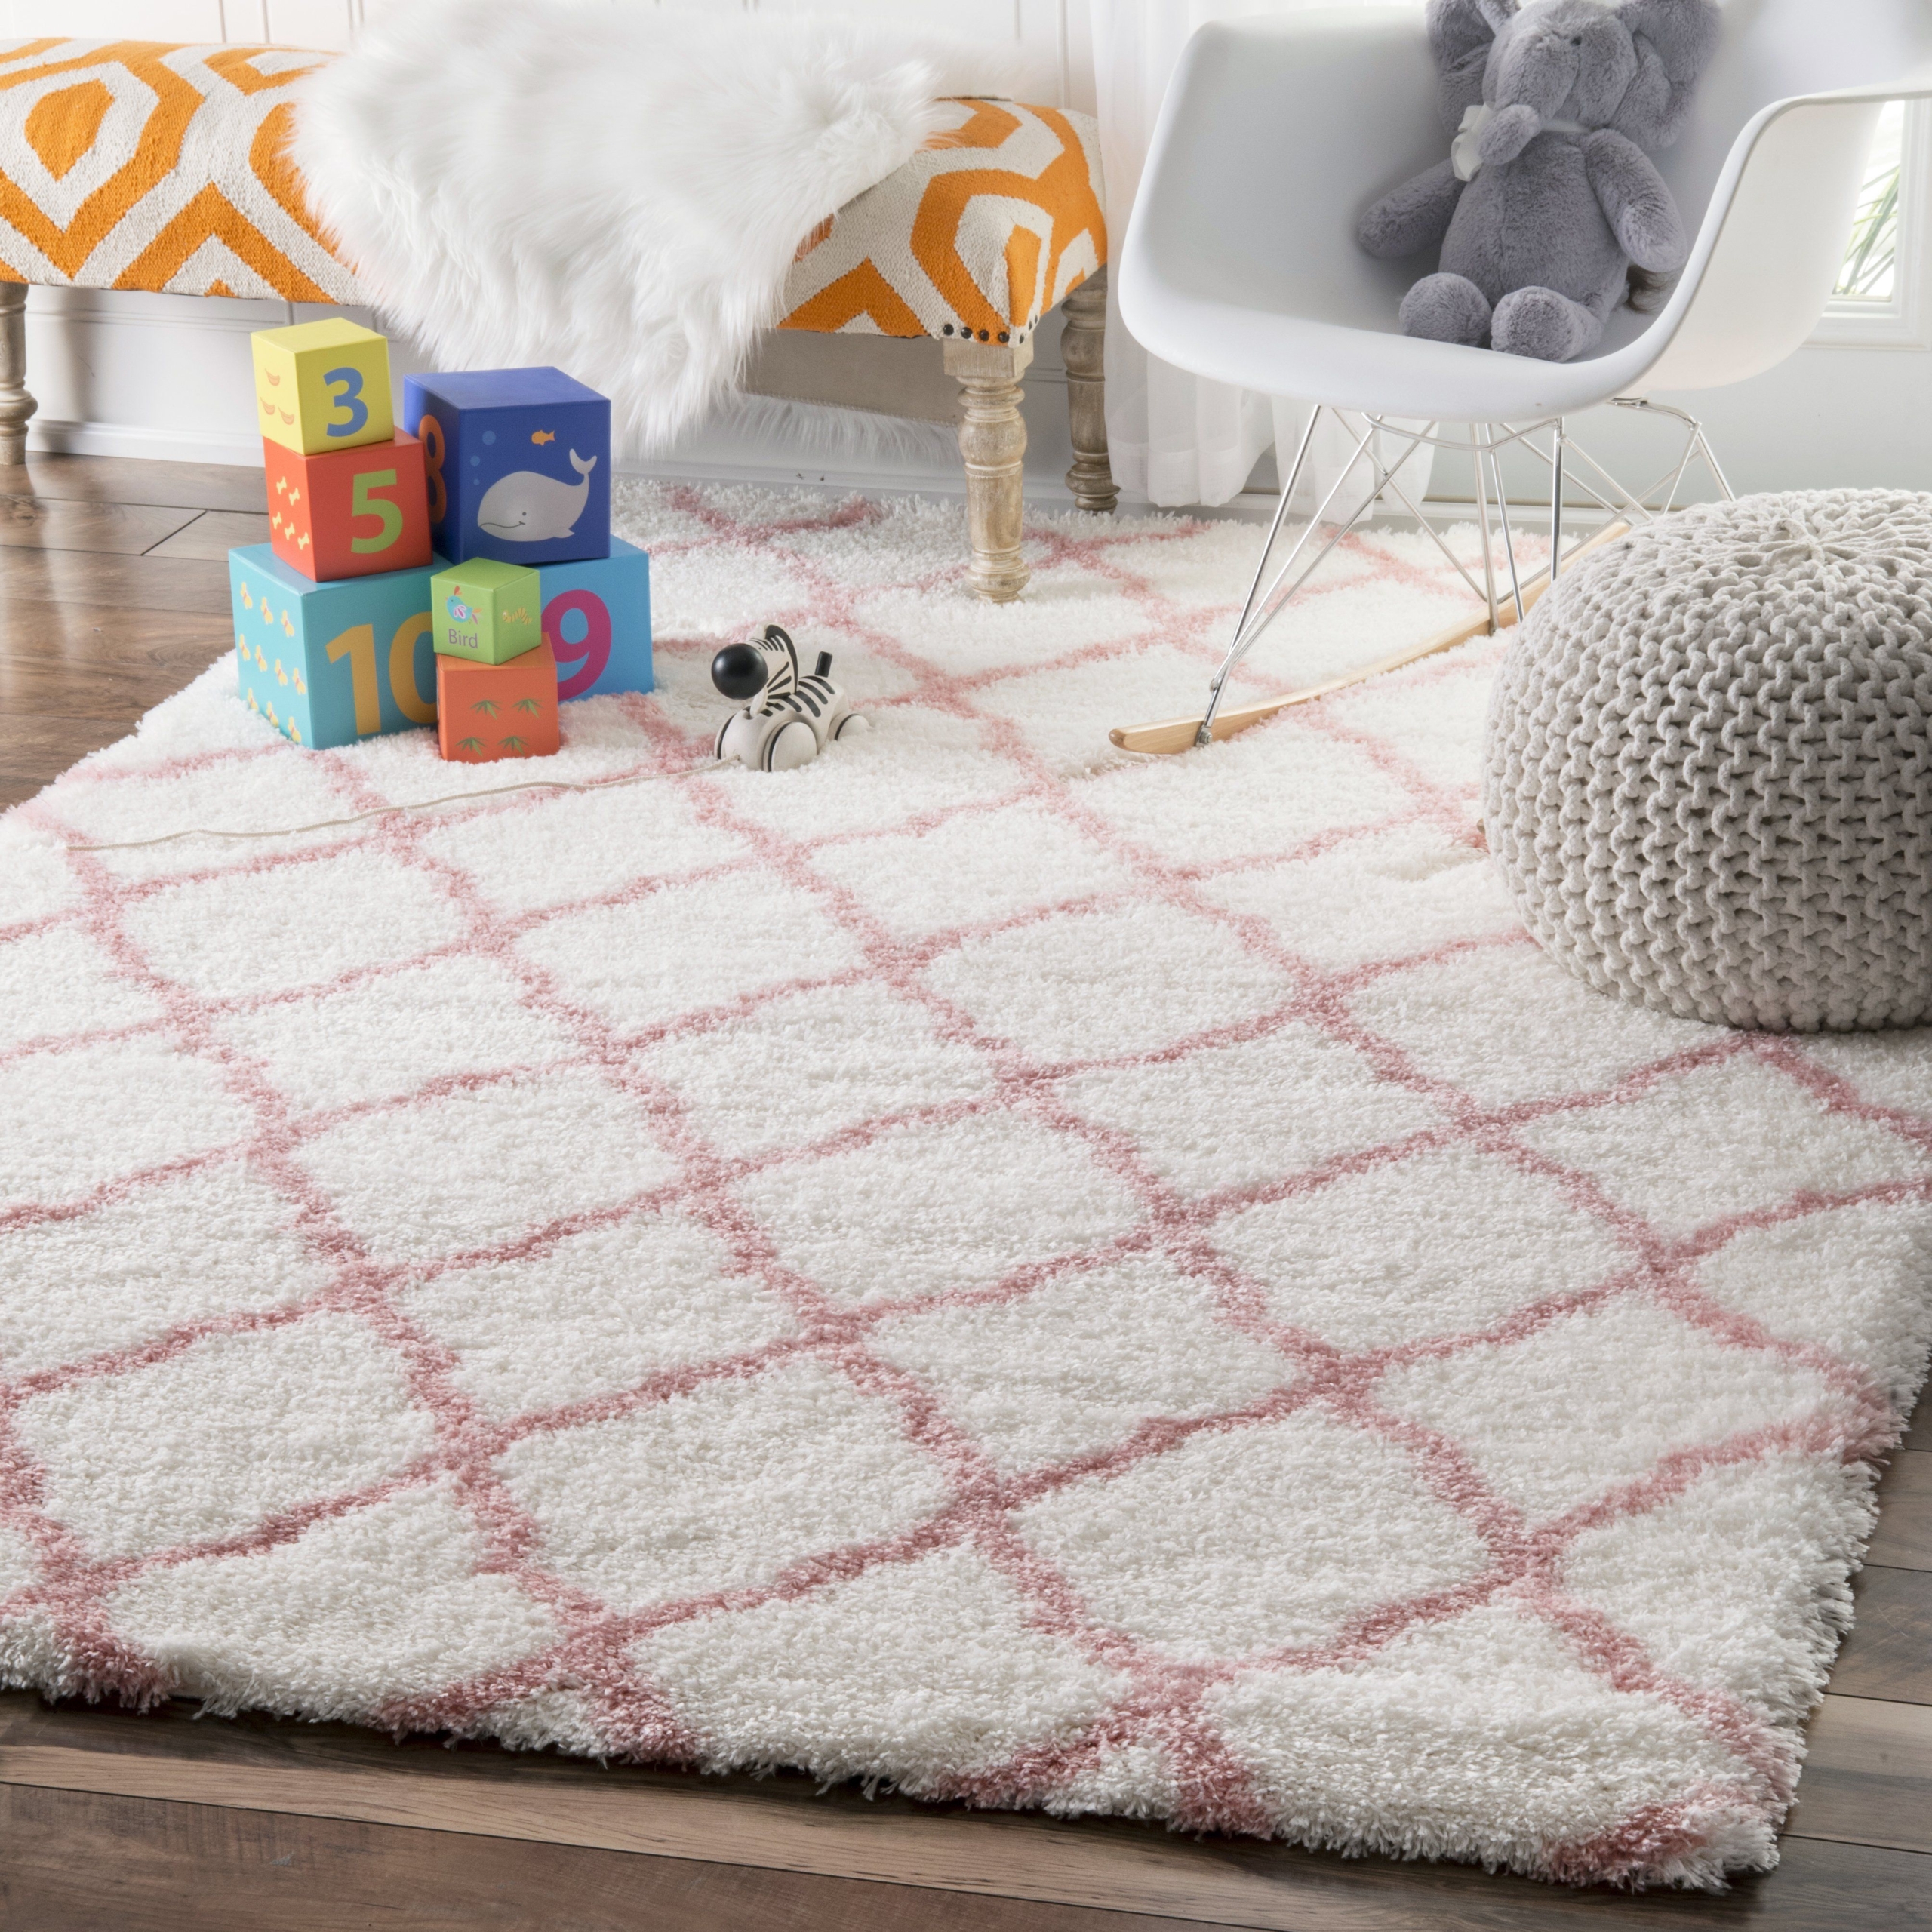 Pink Rug For Nursery Visualhunt, Pink Area Rug For Baby Room